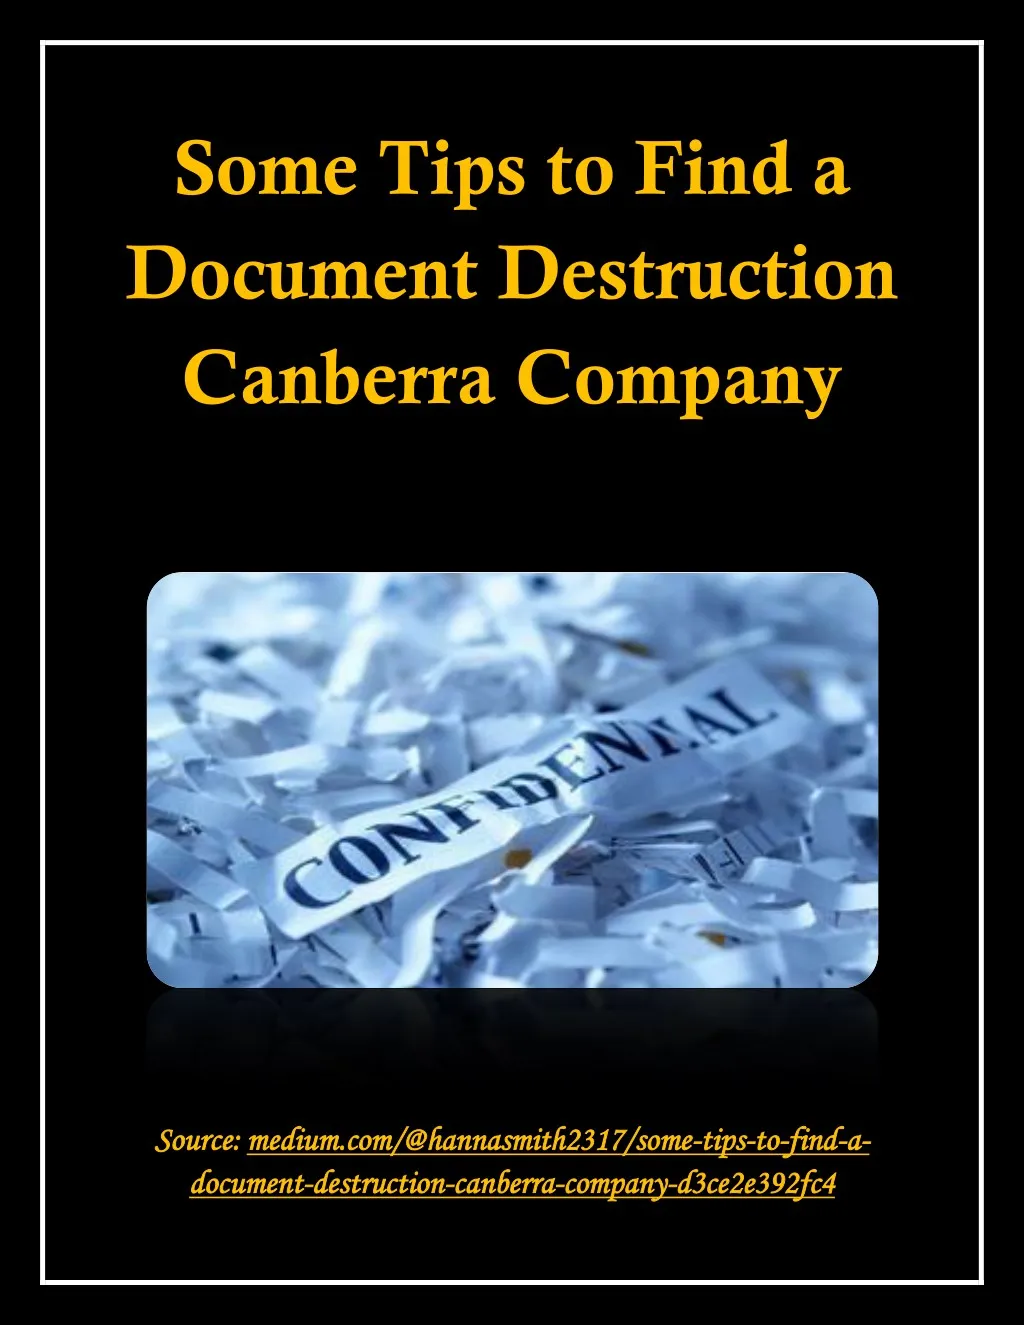 some tips to find a document destruction canberra